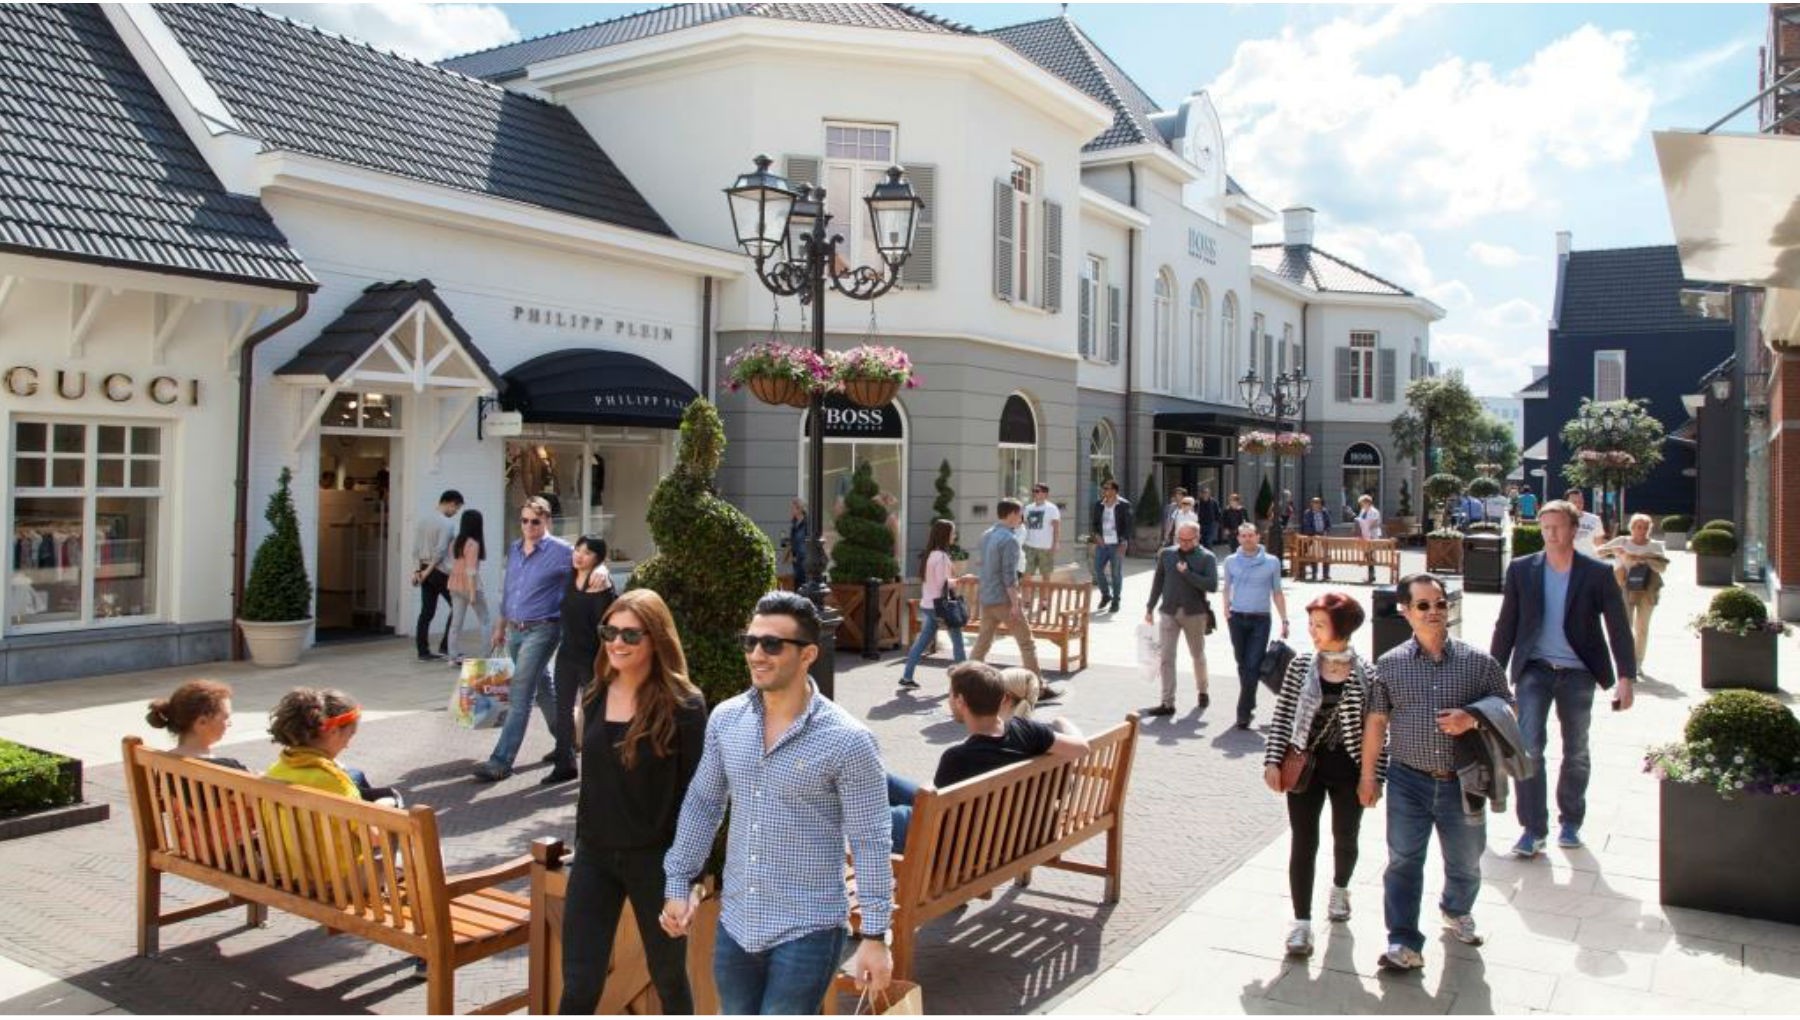 Our Shopping at the Largest Factory Outlet Store, Roermond Designer Outlet